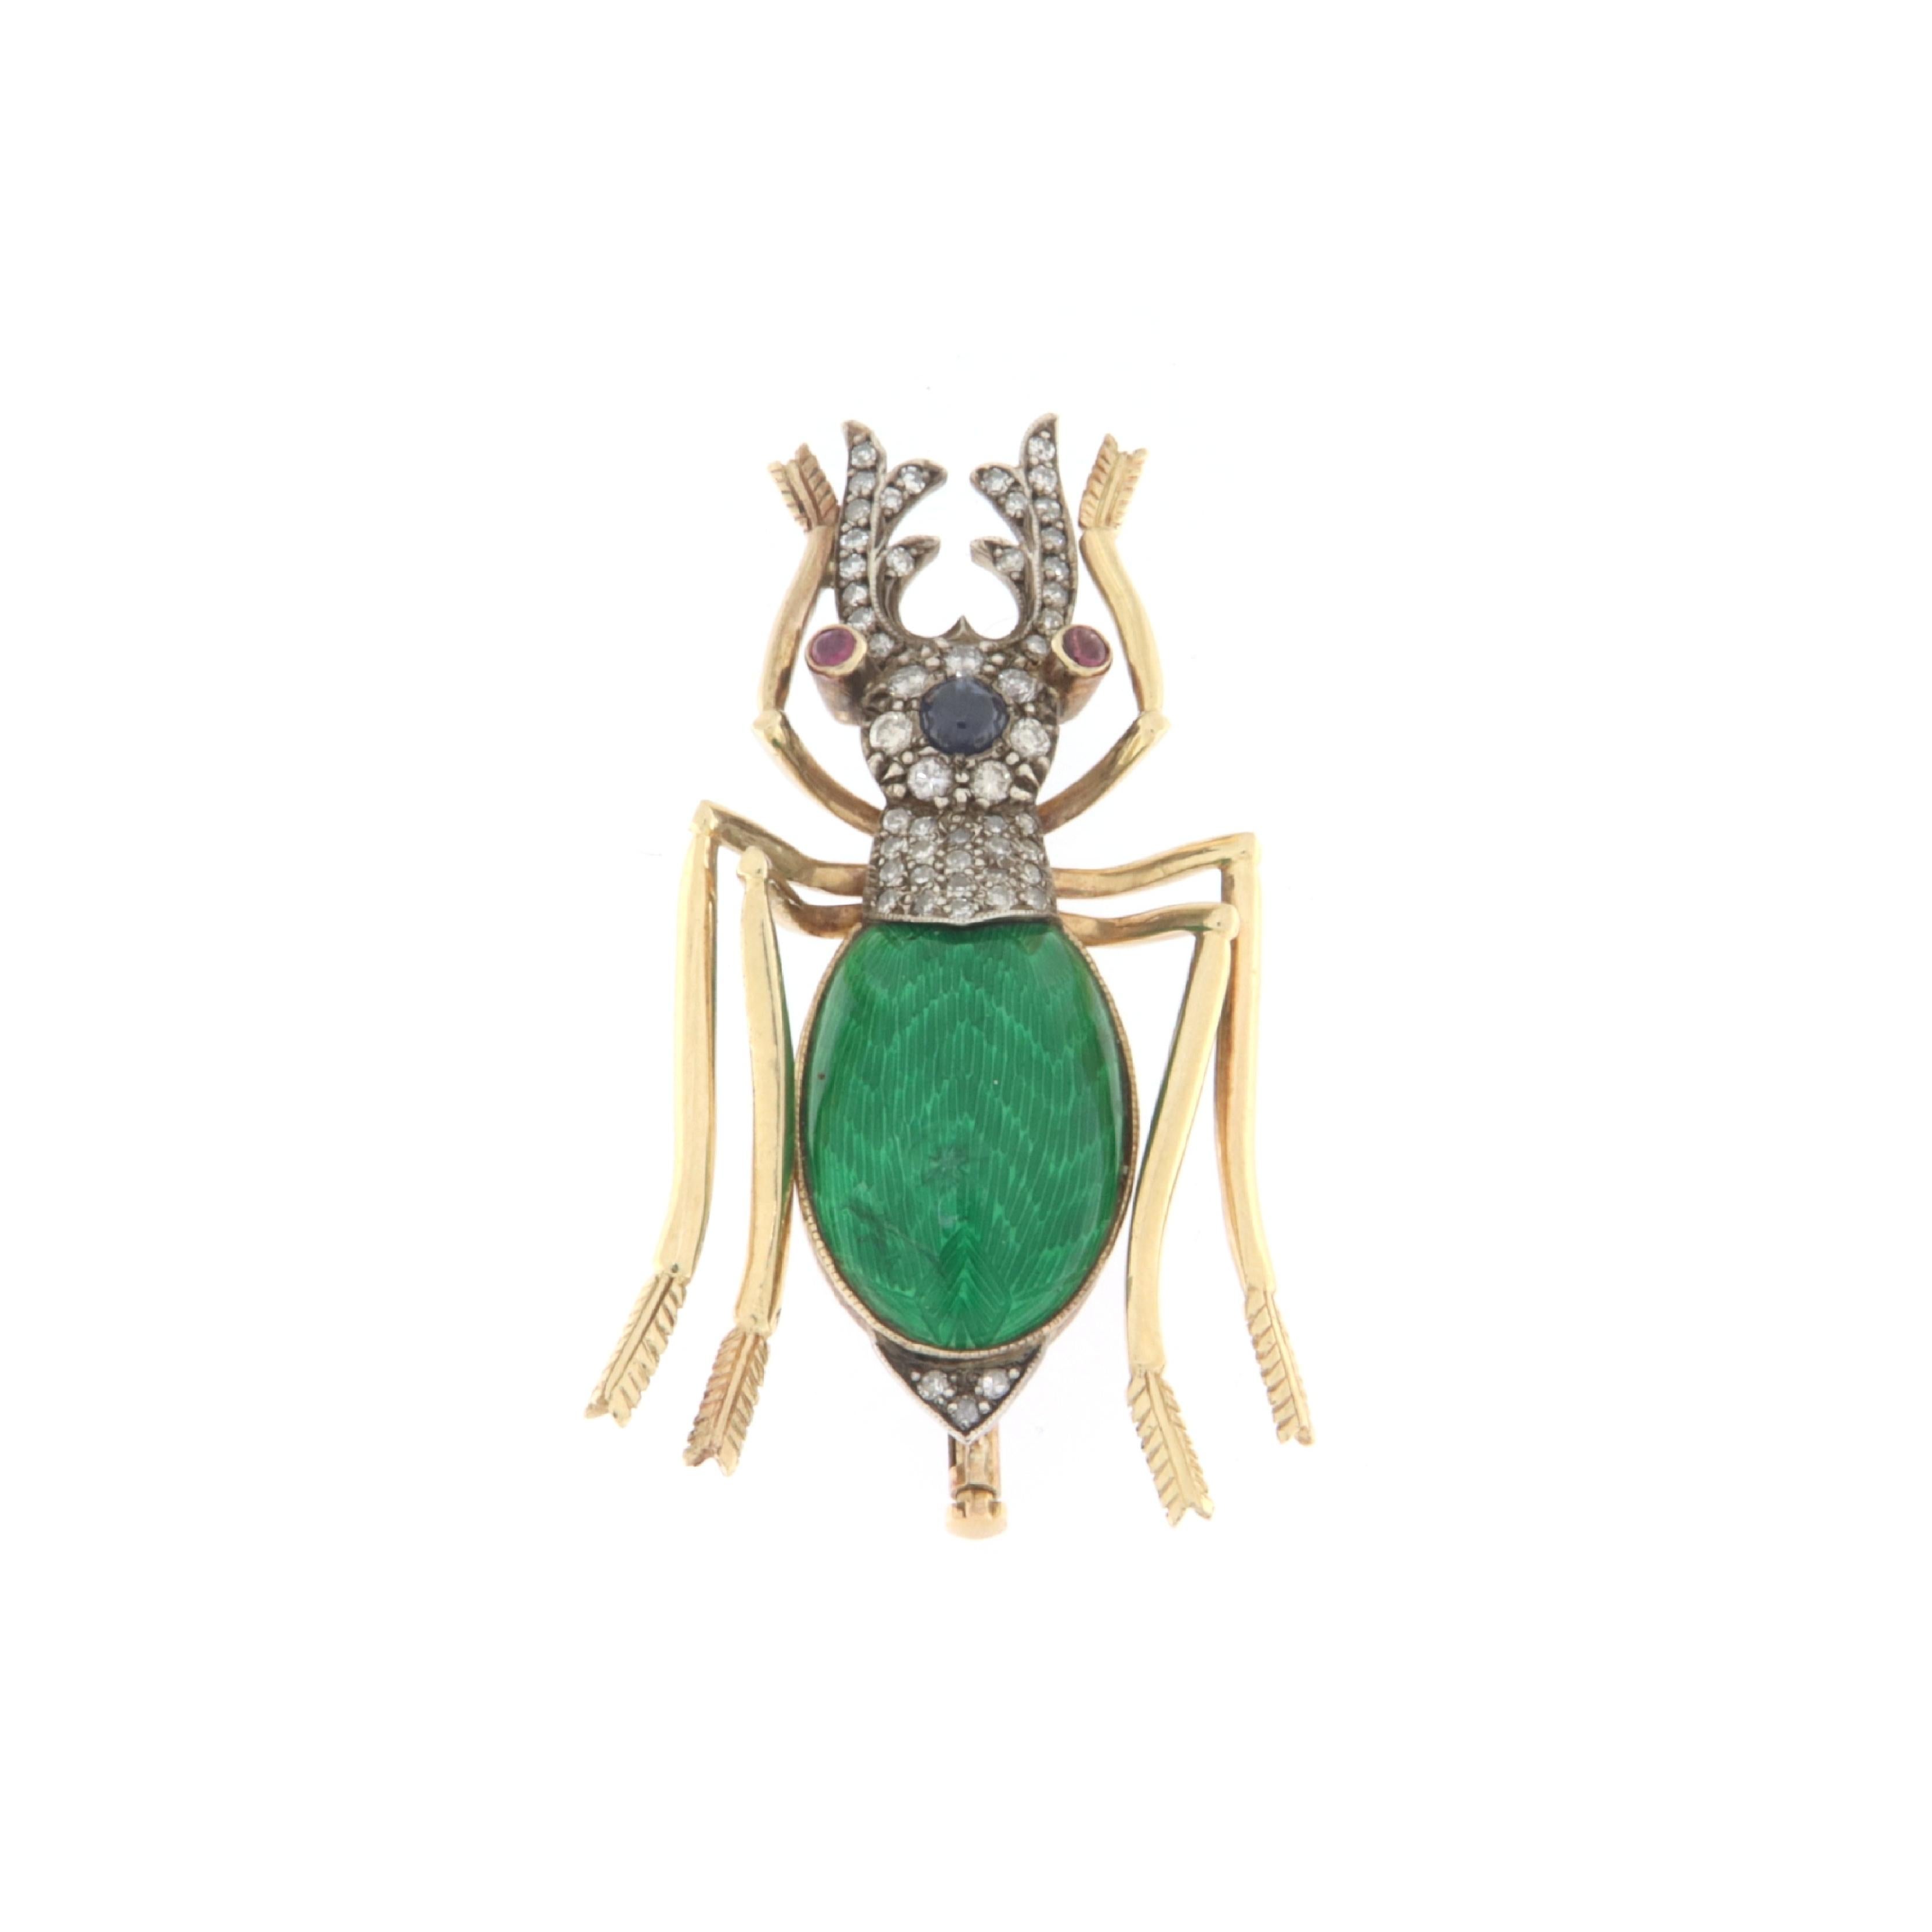 This scarab-shaped brooch is an exemplary showcase of craftsmanship and design, blending fine materials and sparkling gems to create a truly extraordinary accessory. Crafted with 14-karat gold and 800-millesimal silver, this brooch is not just a